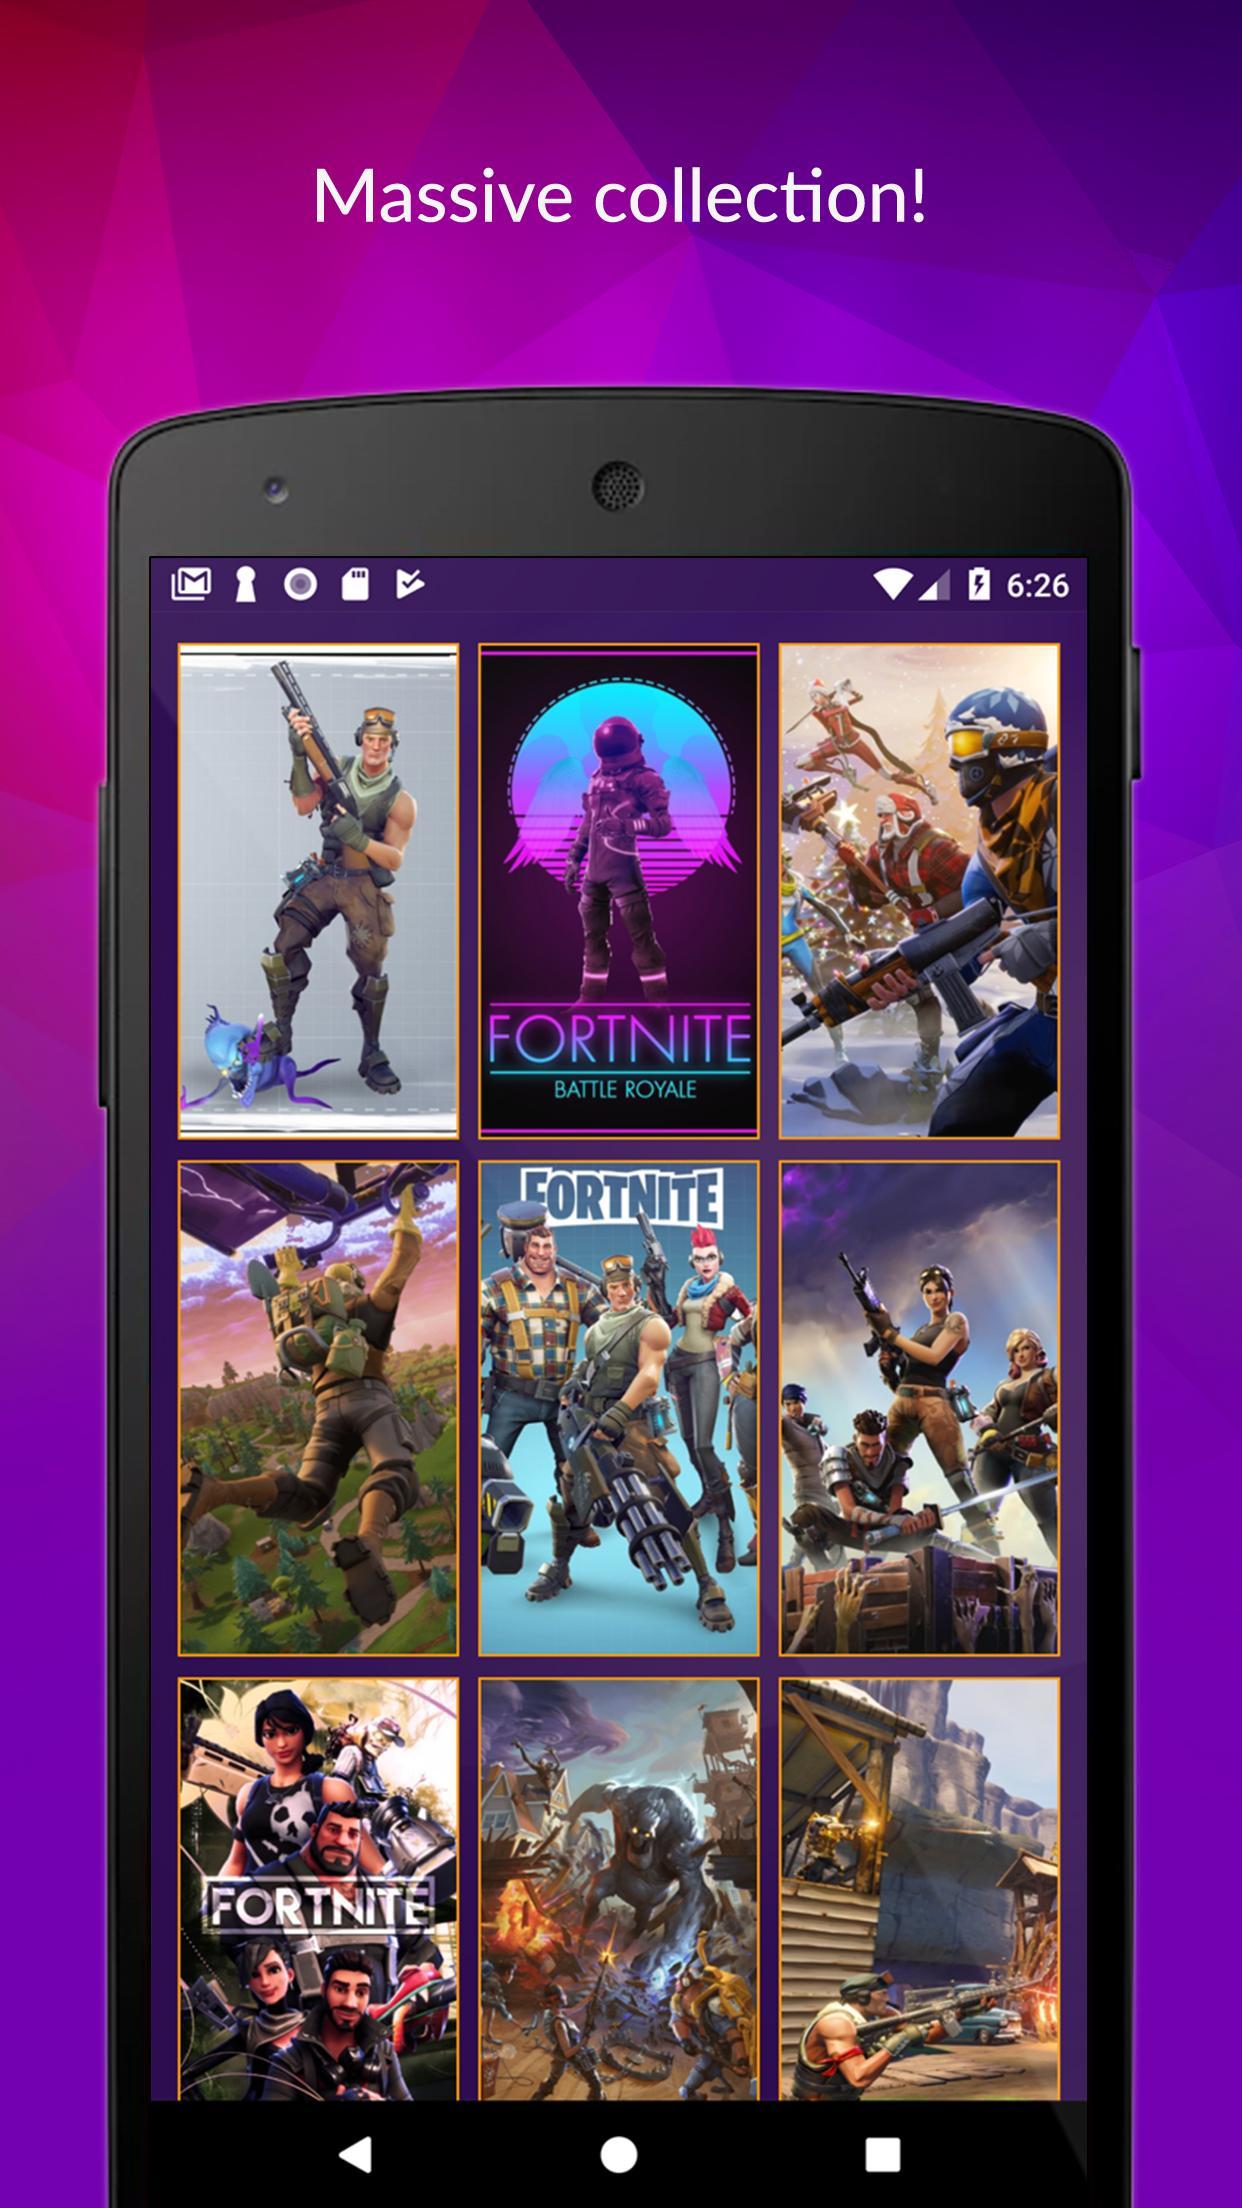 Imba Fortnite Wallpaper For Android Apk